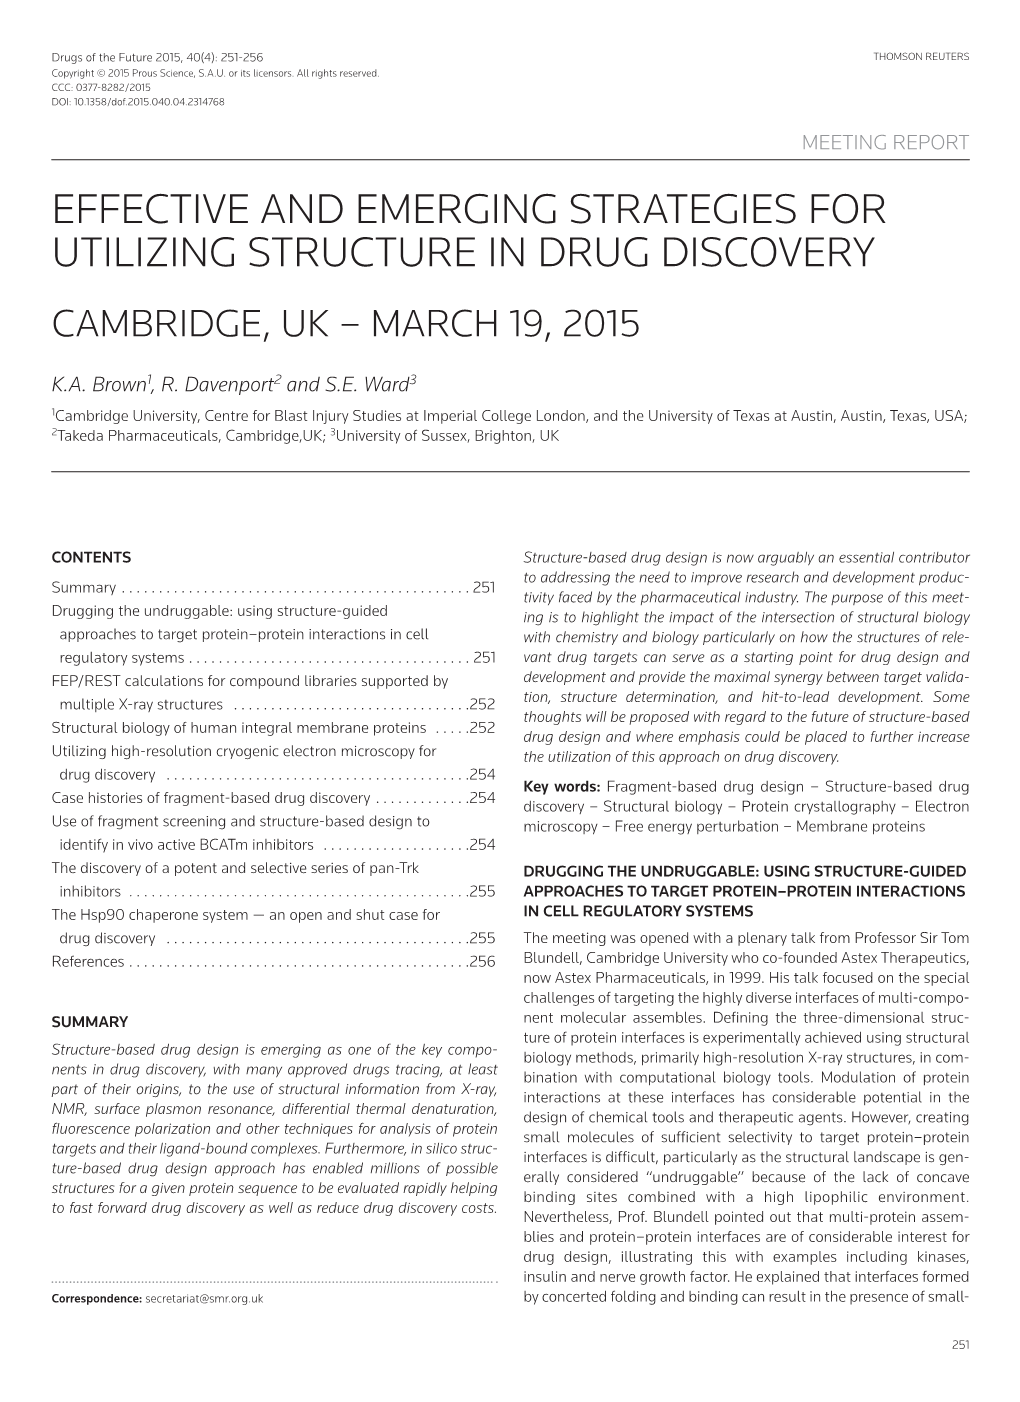 Effective and Emerging Strategies for Utilizing Structure in Drug Discovery. Cambridge, UK – March 19, 2015